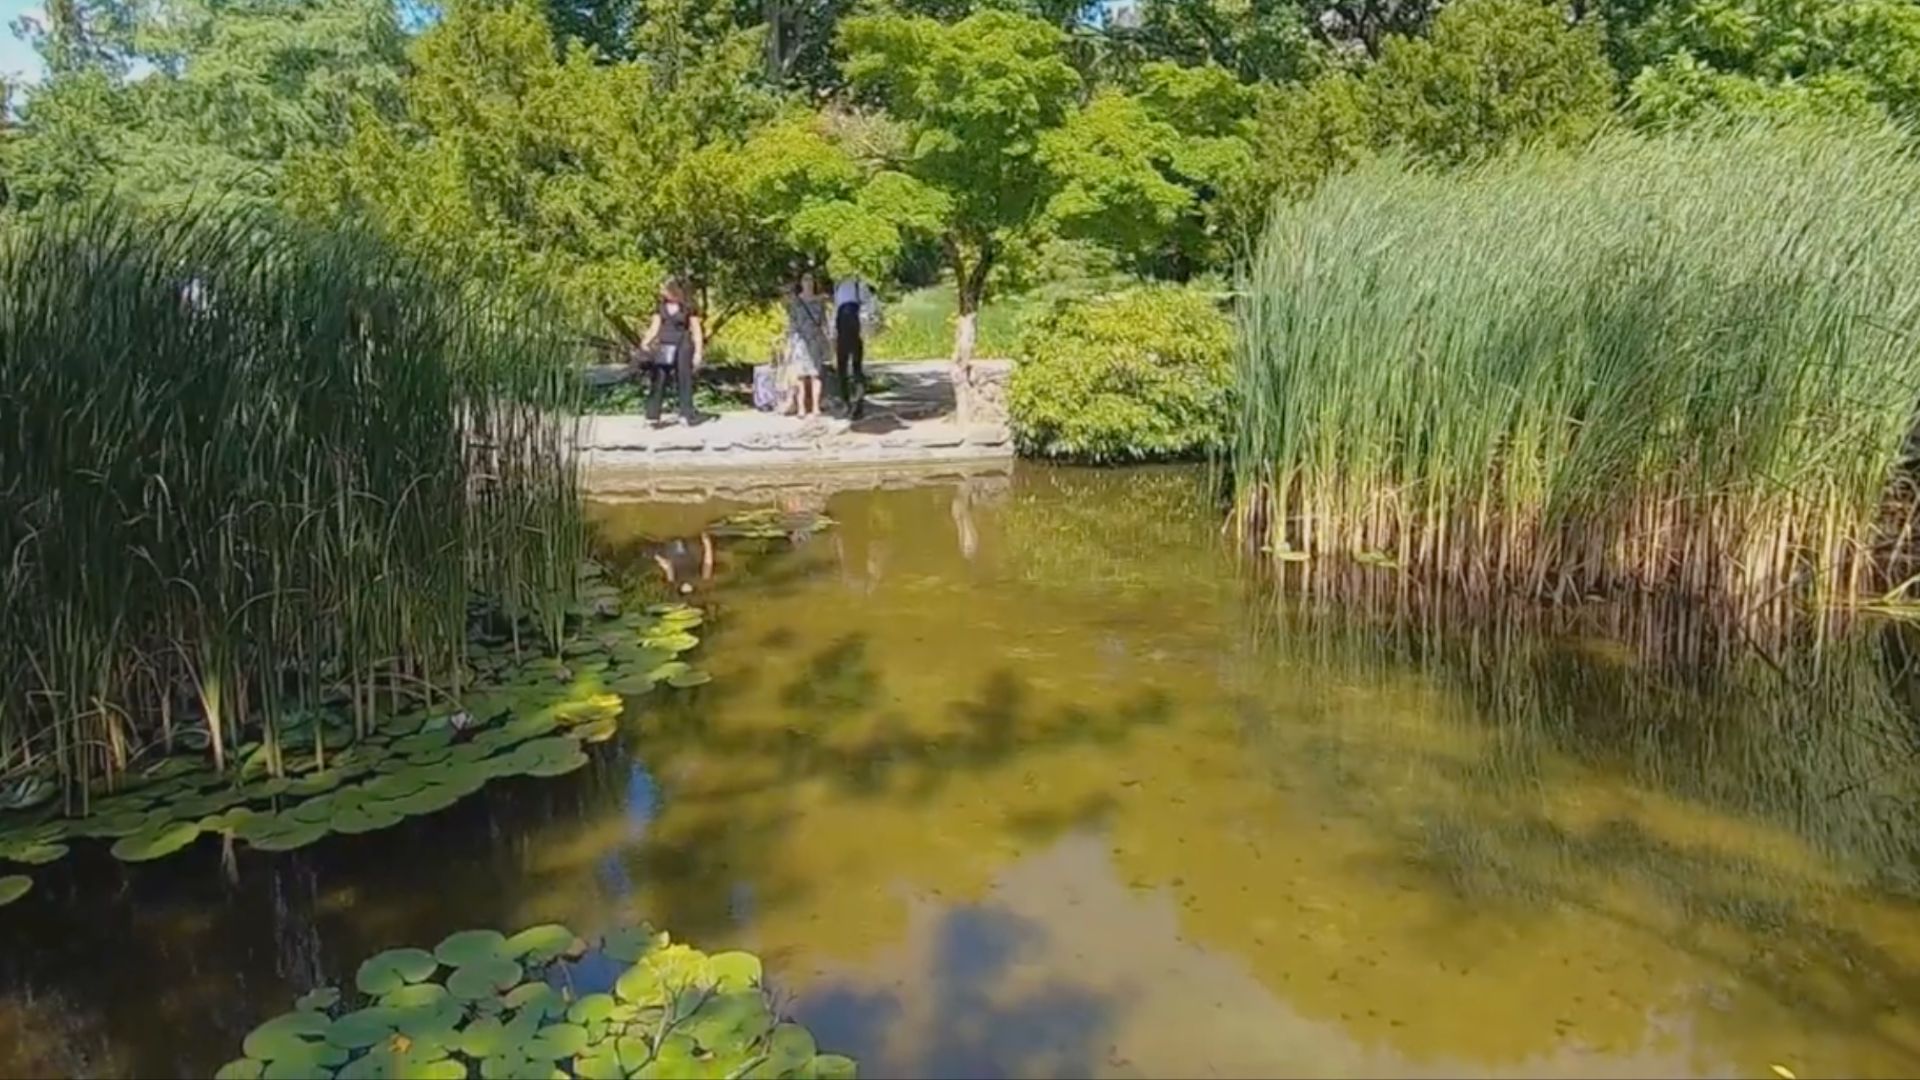 A pond with lily pads and tall grass, surrounded by trees and people walking at the Japanese Garden on Margaret Island in Budapest.